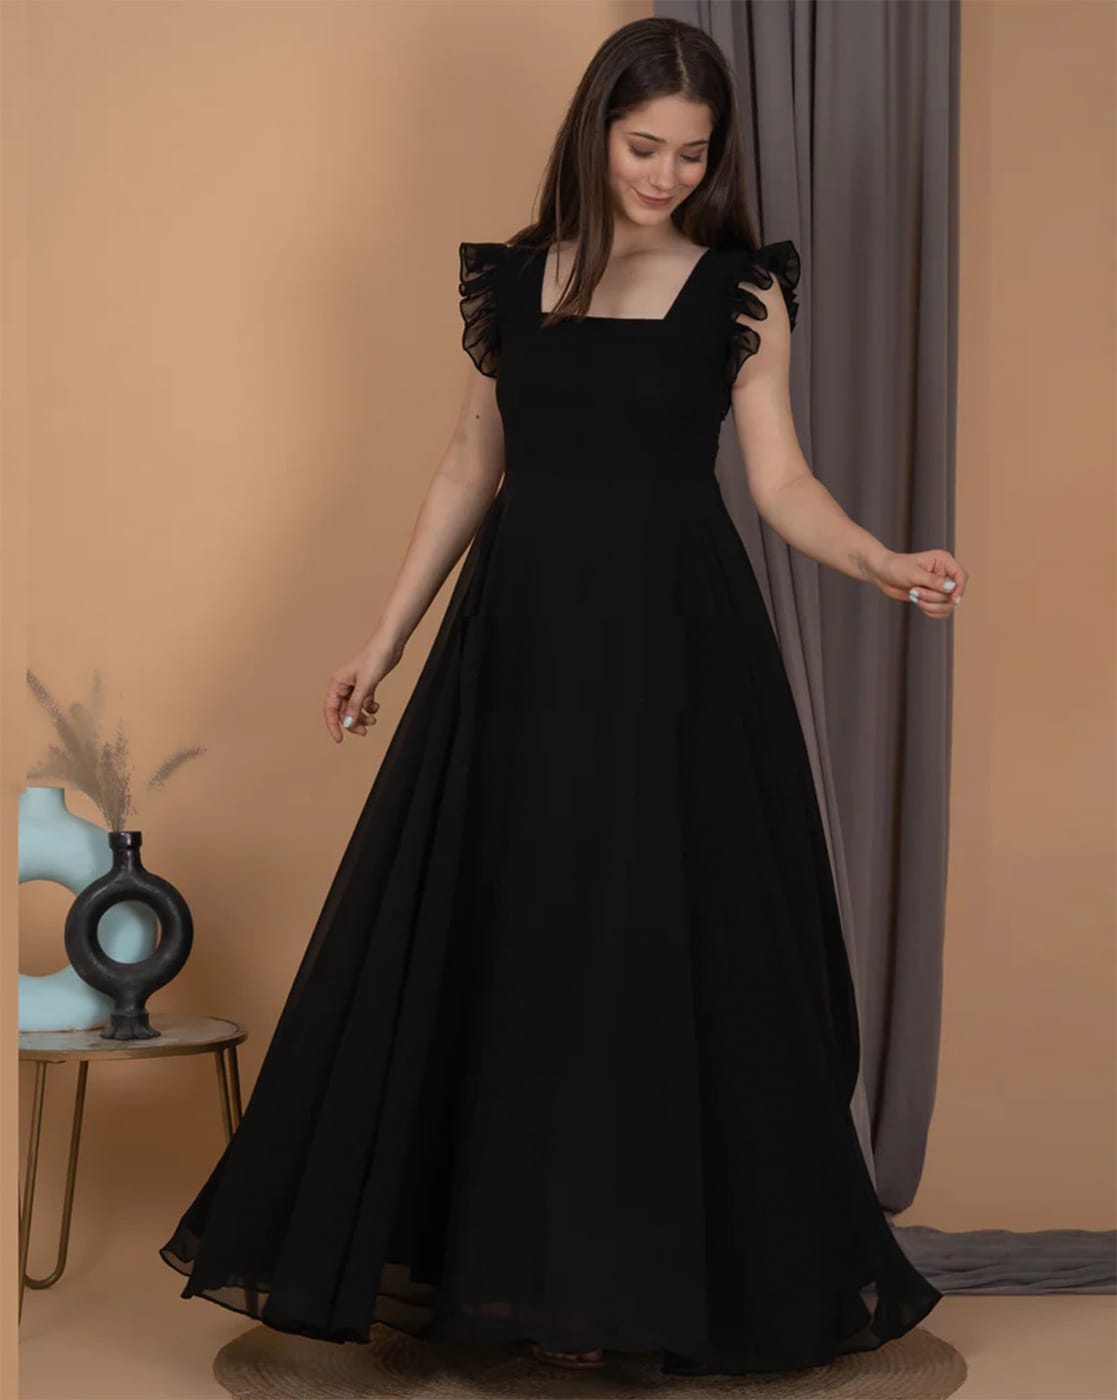 Black Solid Pleated Party Gown with Embroidered Belt - M | Party gowns,  Gowns, Embroidered belt